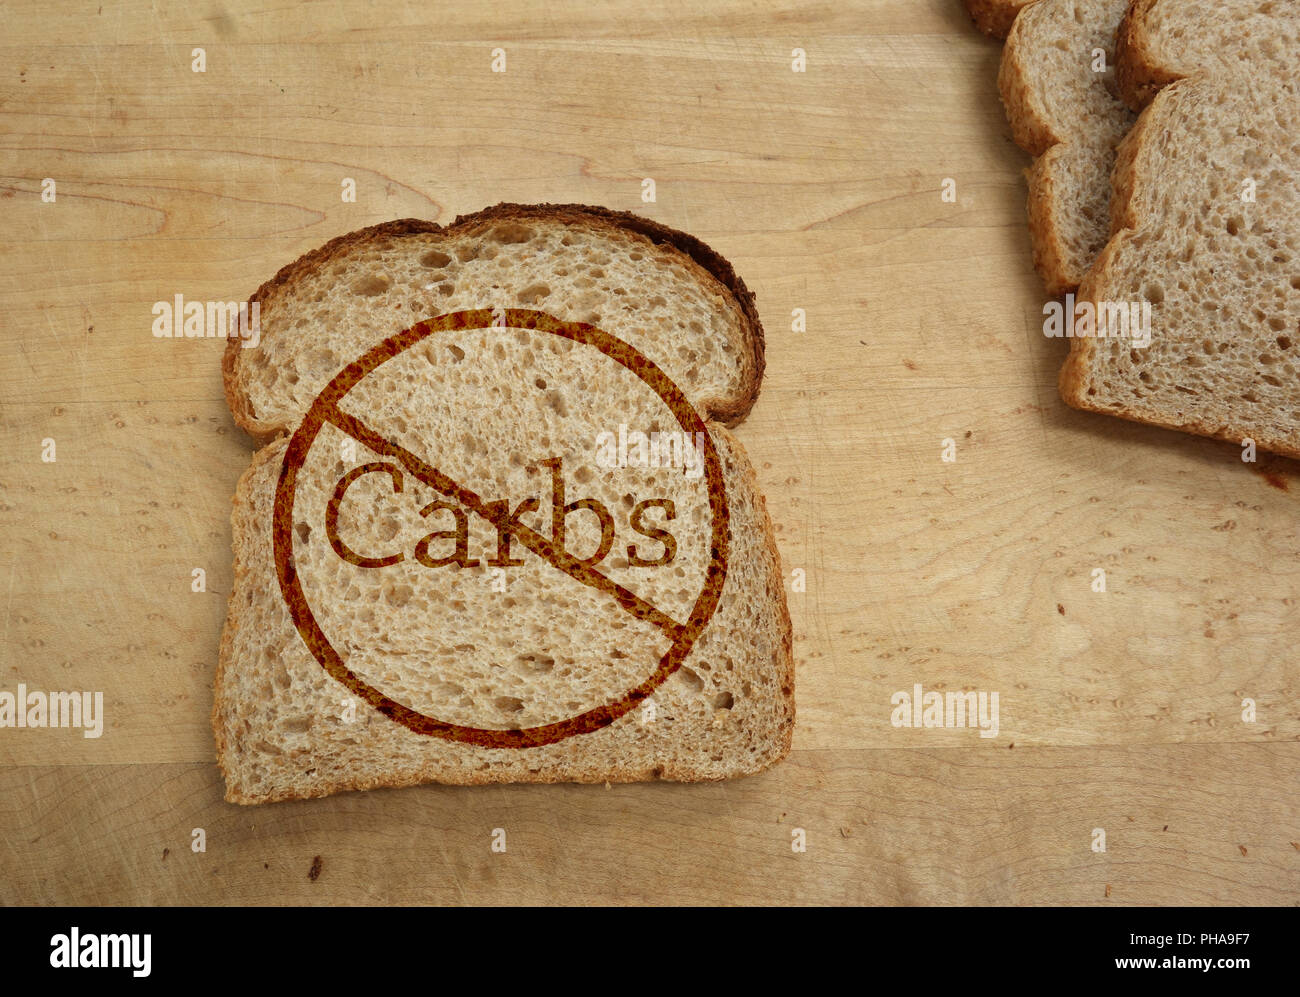 Carbohydrate ban Stock Photo